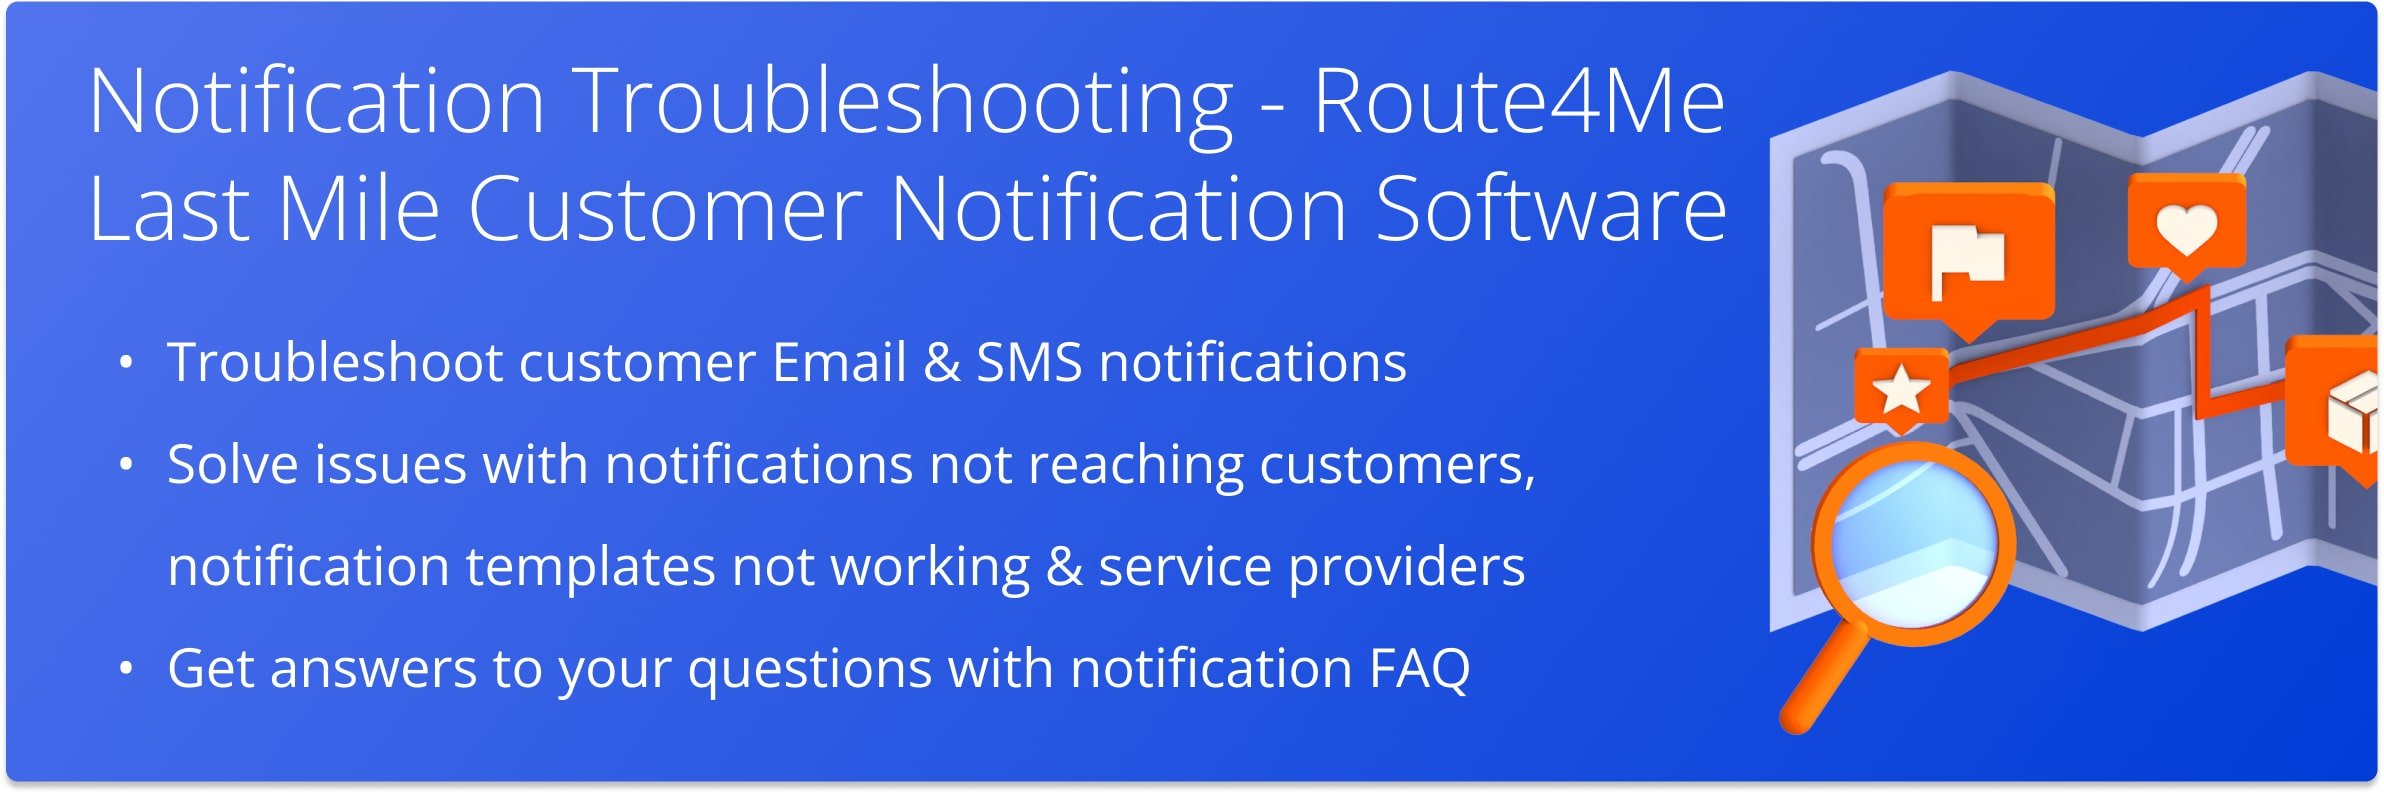 Troubleshoot issues with Email and SMS messaging notifications such as notifications not being received by customers, notification templates not working, and more. Get answers to frequently asked questions about notifications.